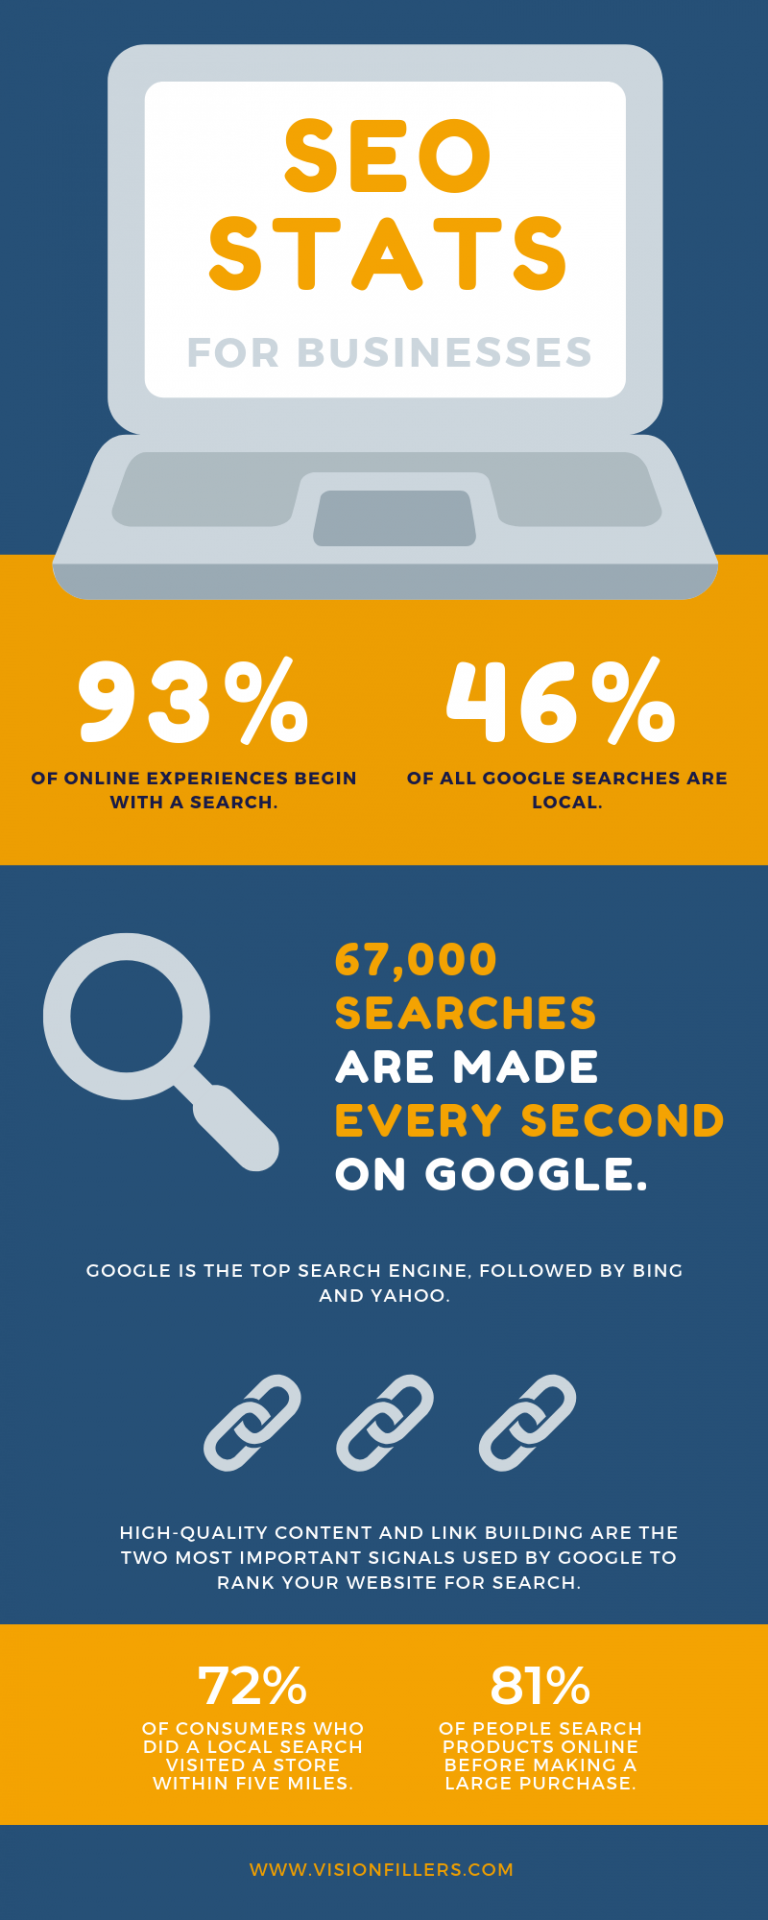 SEO Stats for Businesses Vision Fillers